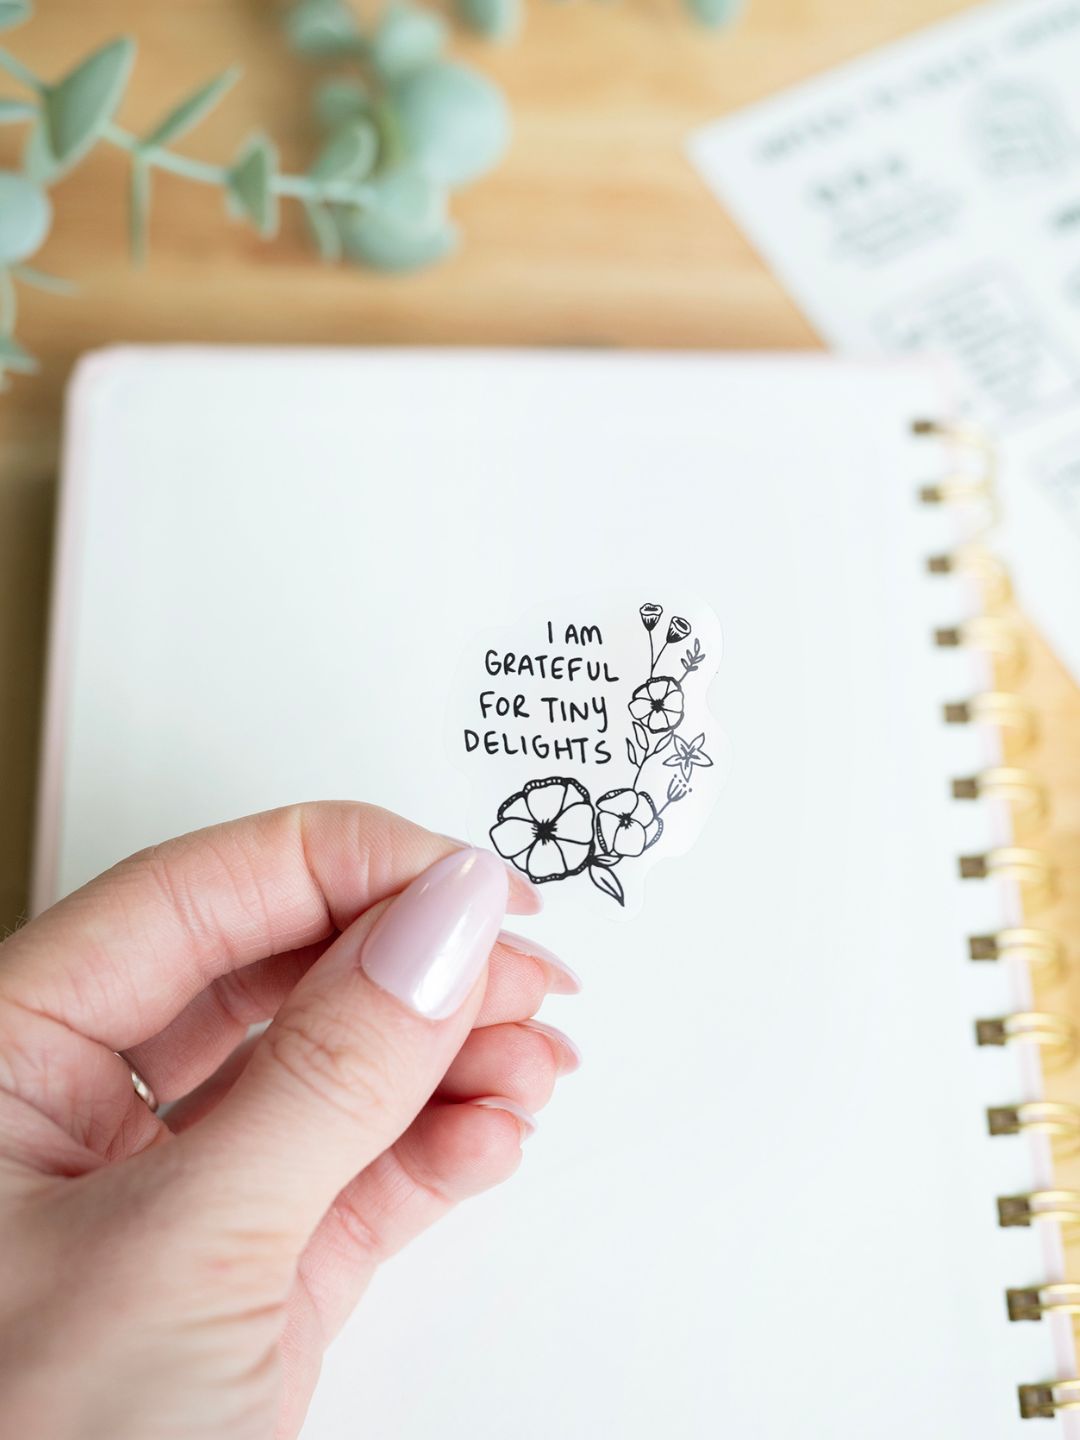 AFFIRMATION Stickers for Planner and Bullet Journals. 12 Fonts to Choo – My  Happy Place Stickers